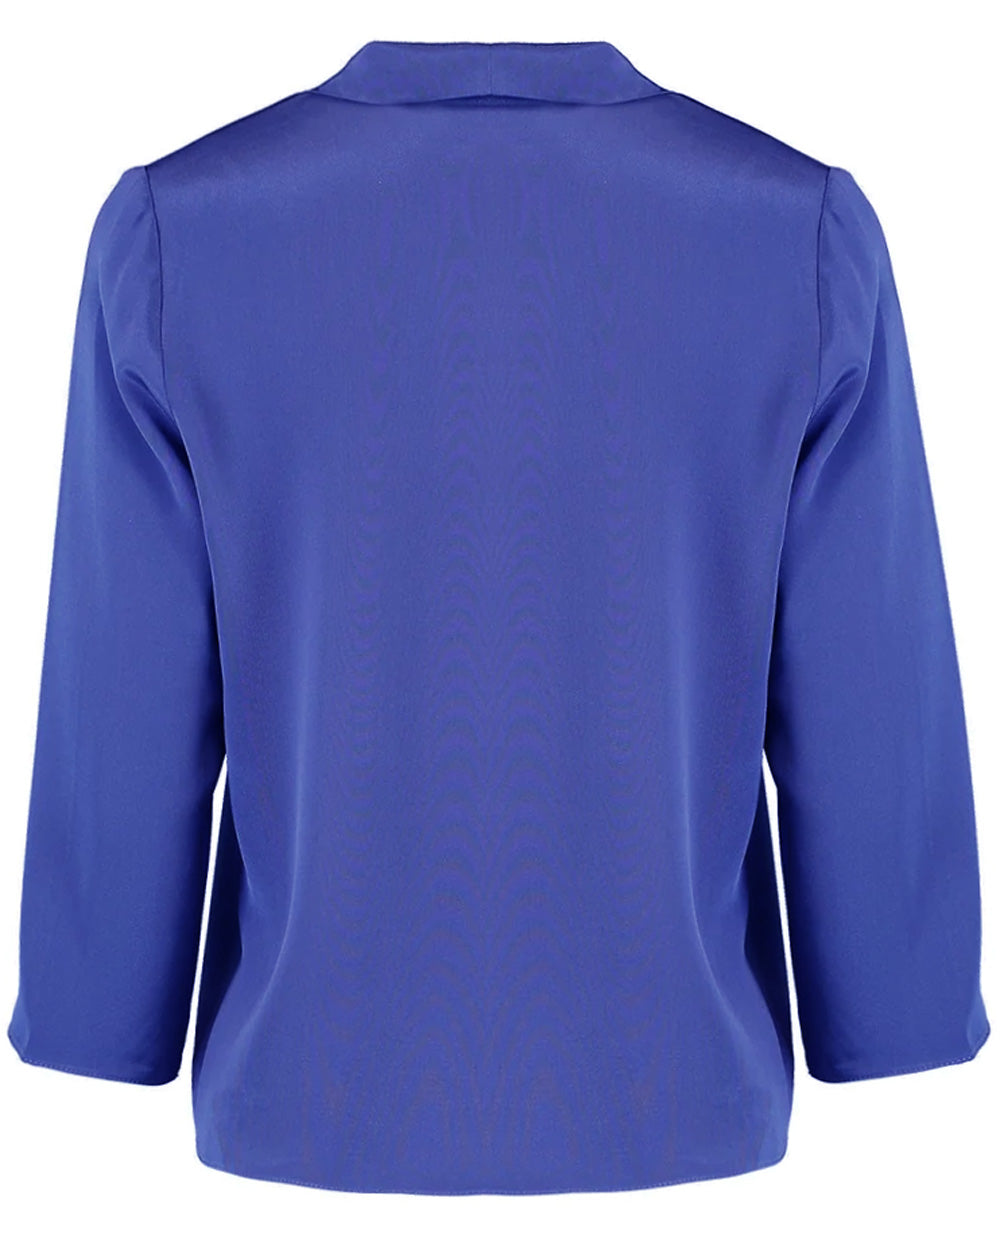 Sapphire Square Frolic Top